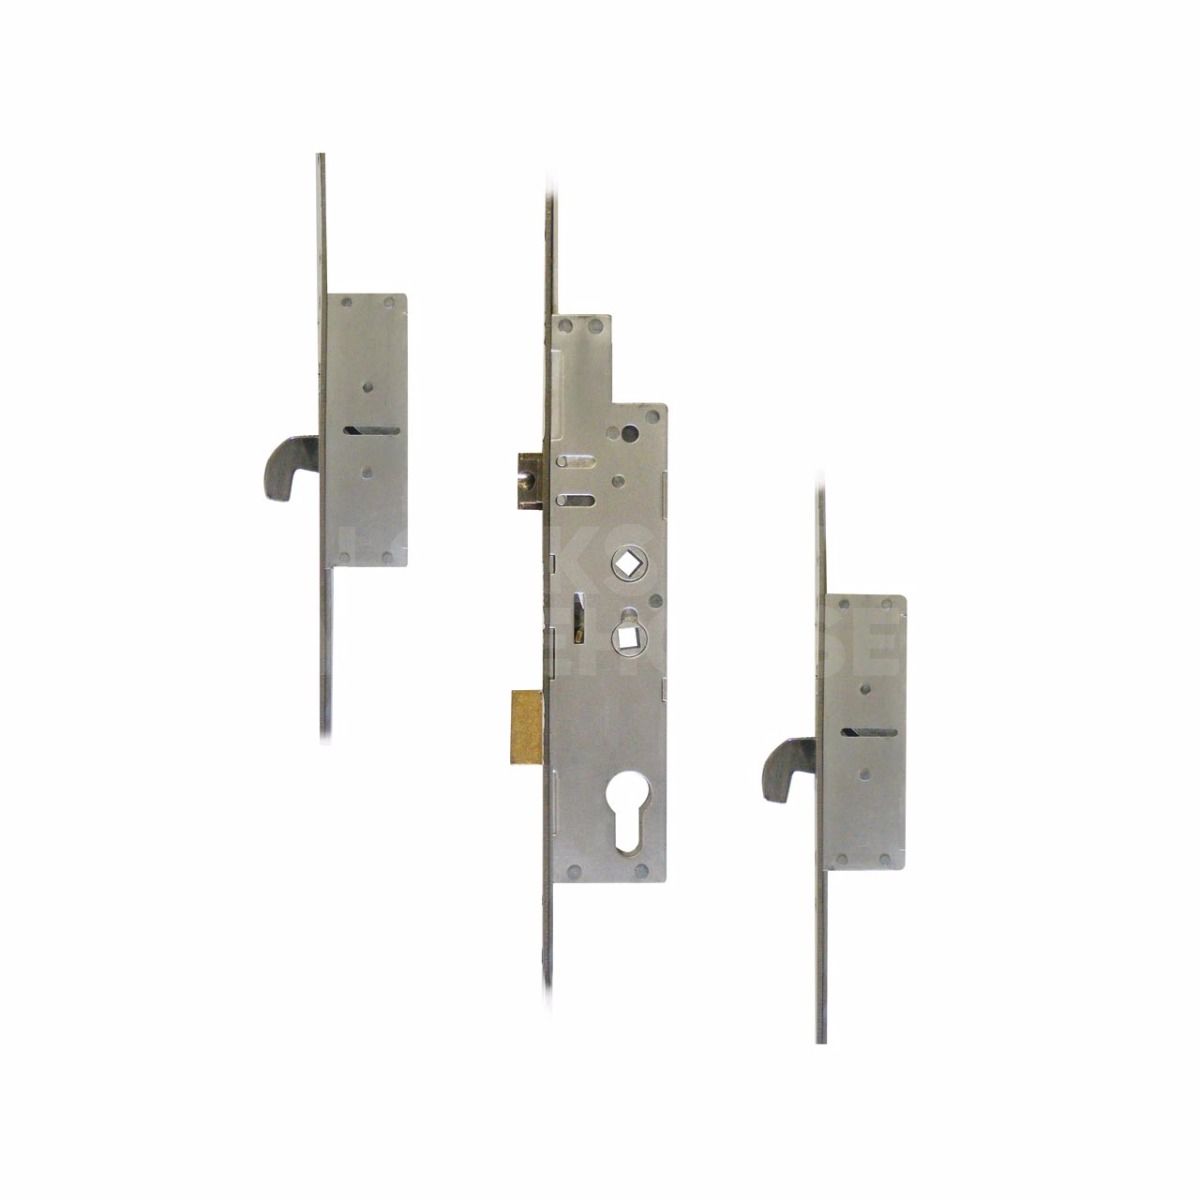 Fullex Crimebeater 2 Hook - Twin Spindle: UPVC Multi-Point Locking Mechanism